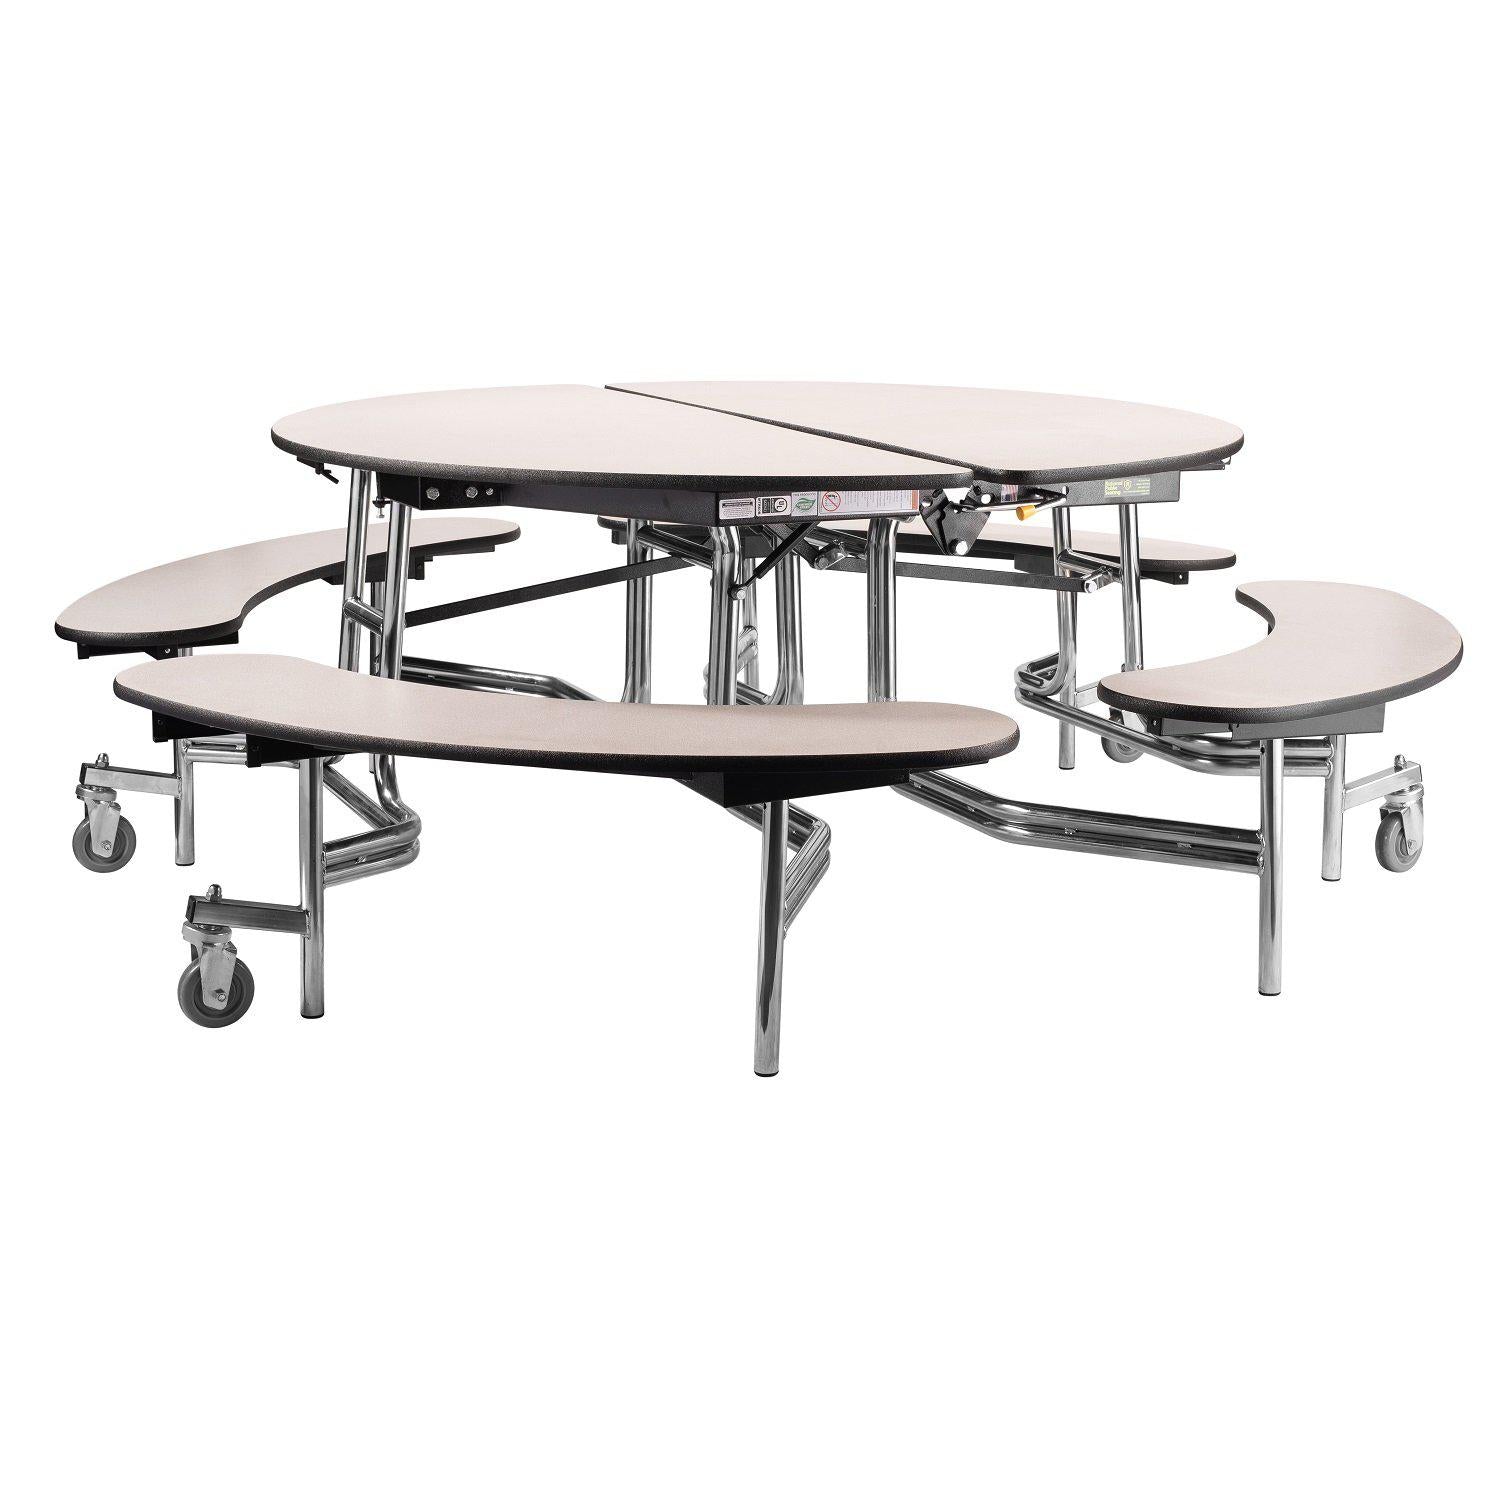 Mobile Cafeteria Table with Benches, 60" Round, MDF Core, Black ProtectEdge, Chrome Frame